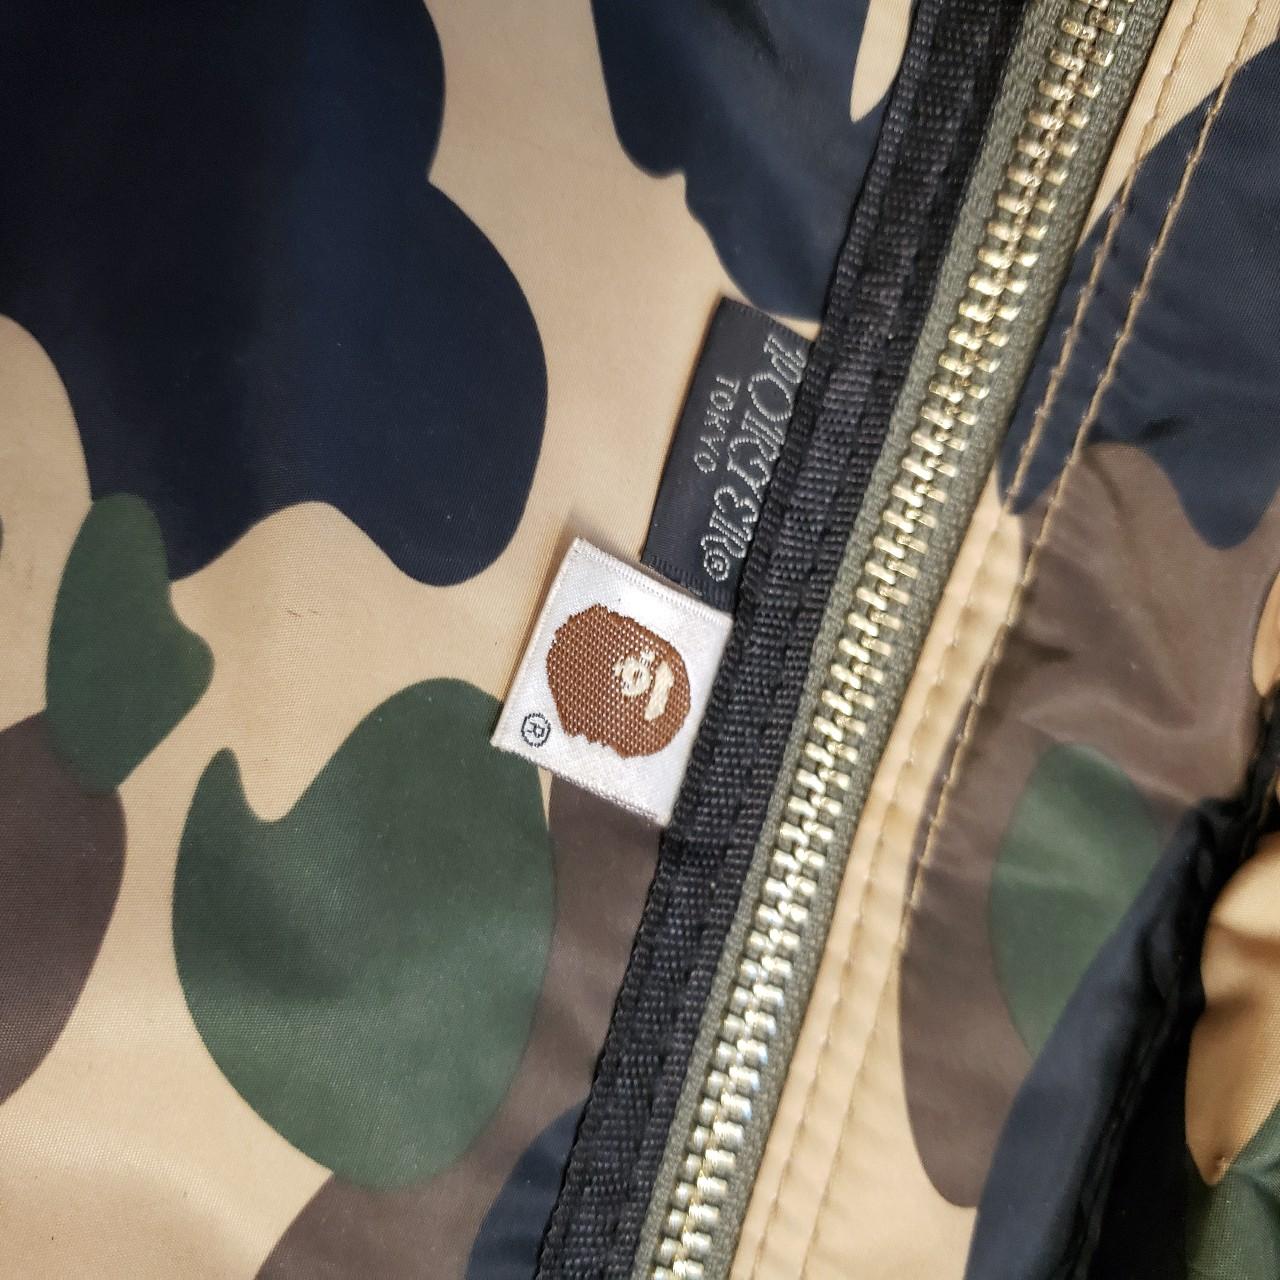 BAPE X MCM Camo backpack These were even more - Depop